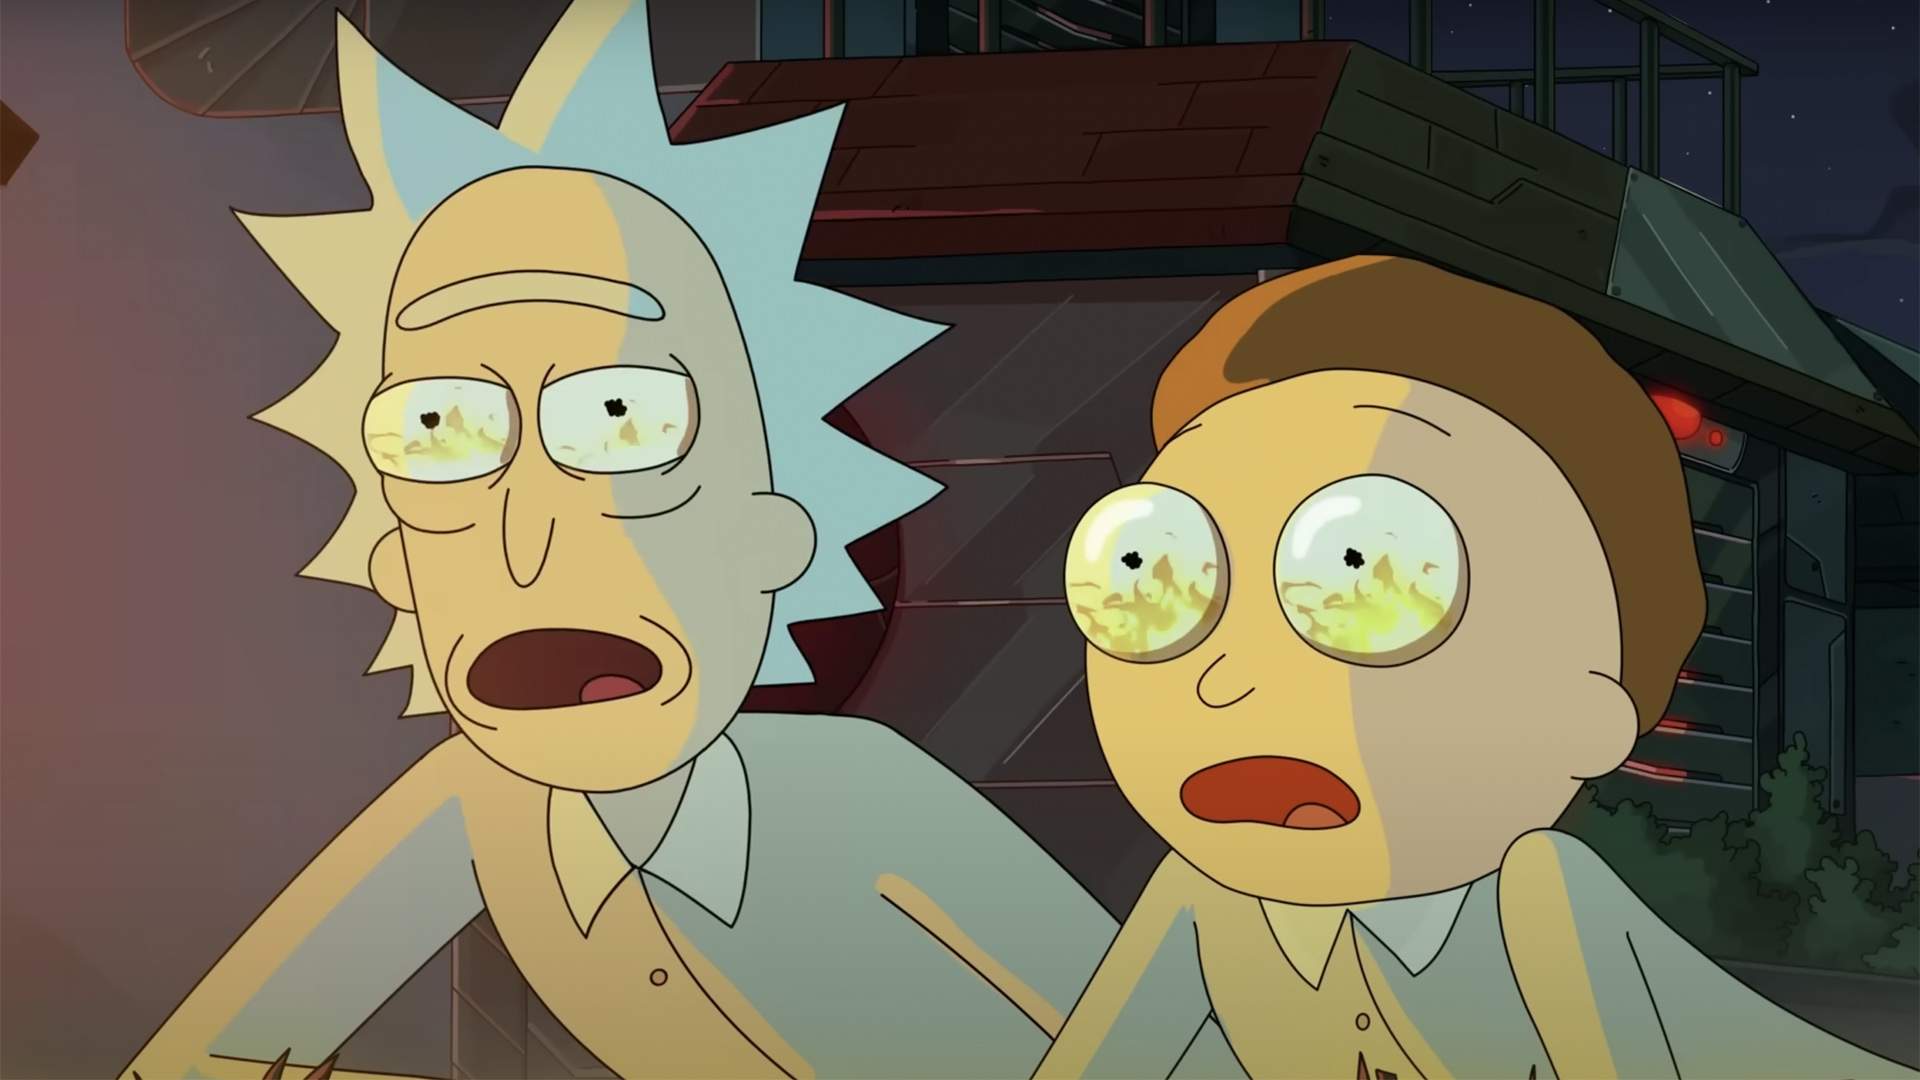 The Unsurprisingly Chaotic (and Paranoid) Full Trailer for 'Rick and Morty' Season Six Is Here